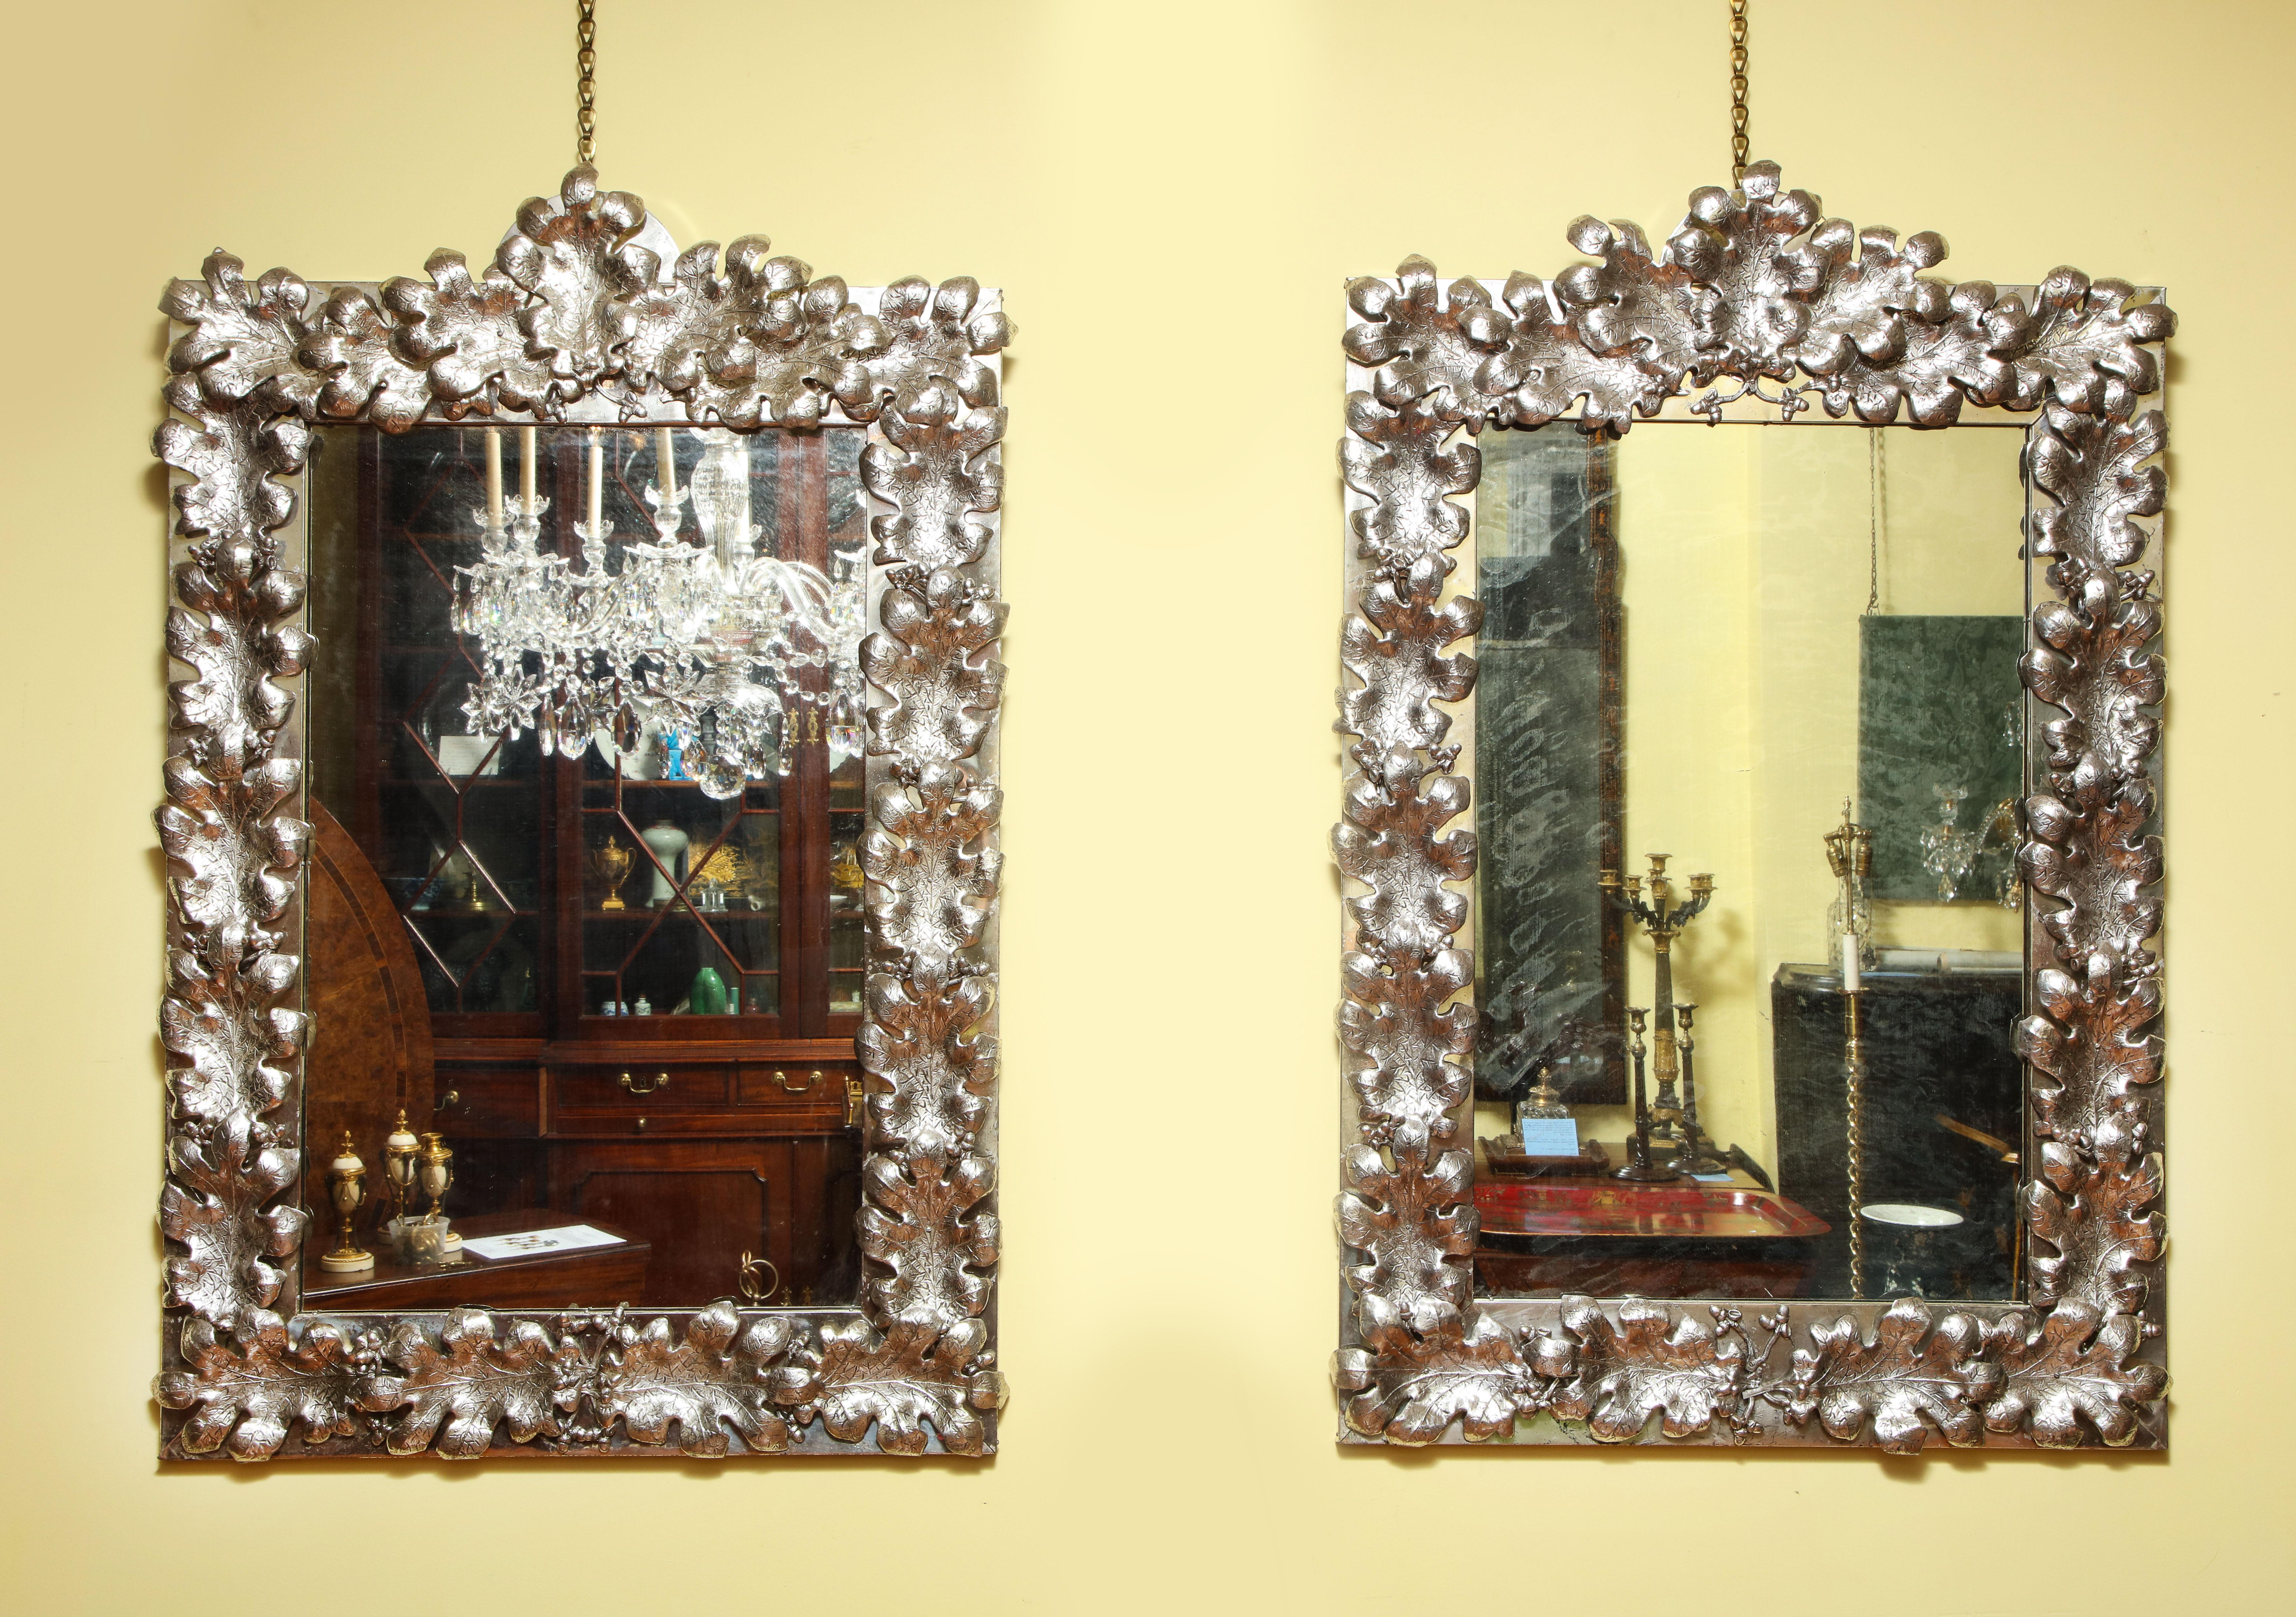 Fine and Exceptional Large Pair of Mid-Century Modern rectangular arch top silvered tin oak leaf mirrors, each with 21 hand-molded silver plated and lacquered oak leaves alternating with silvered lead sprigs of acorns, on silvered frames on hardwood